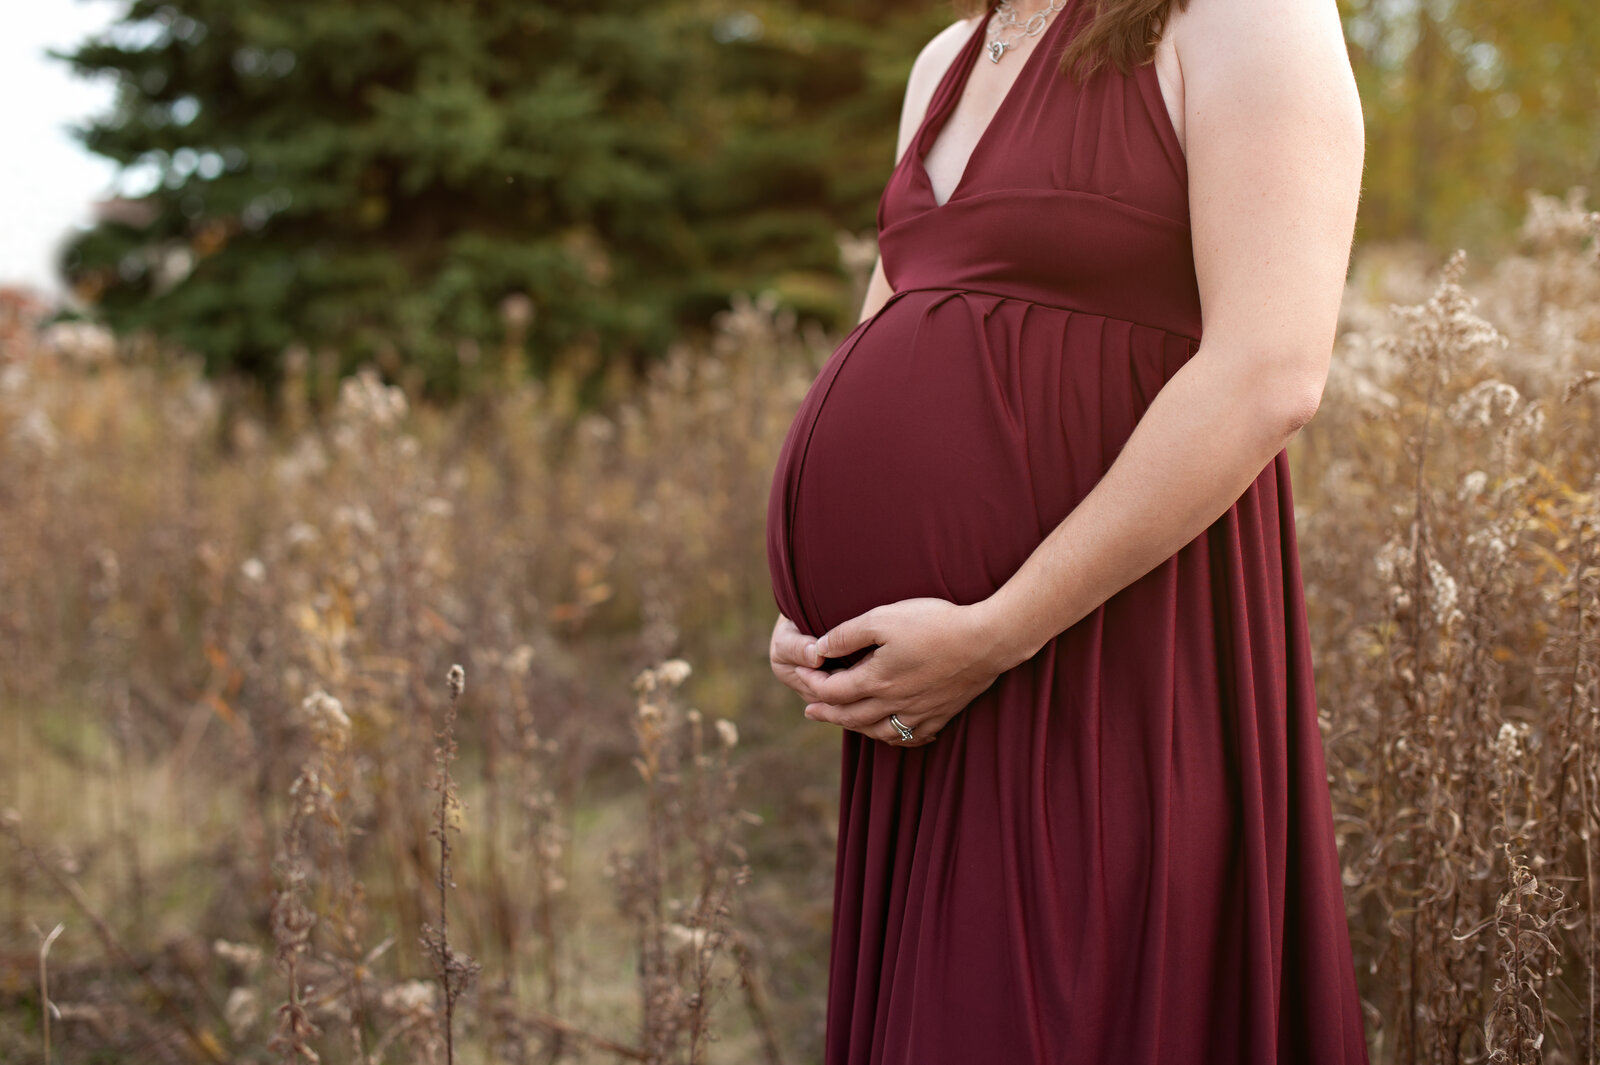 Outdoor-maternity-session-belly-in-field-south-bend